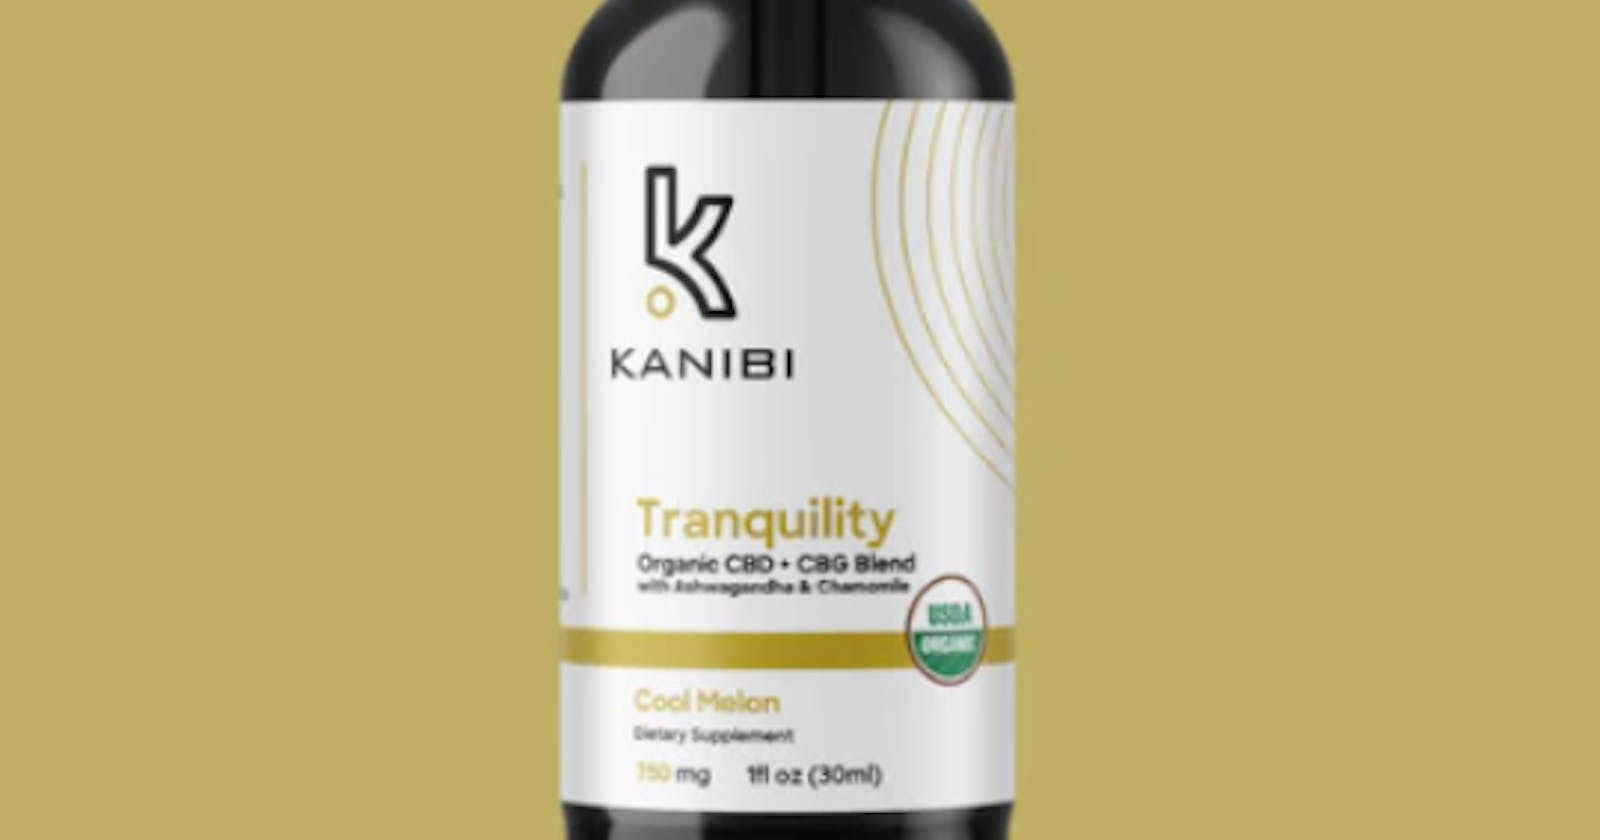 Find Your Calm: Introducing Kanibi Tranquility CBD